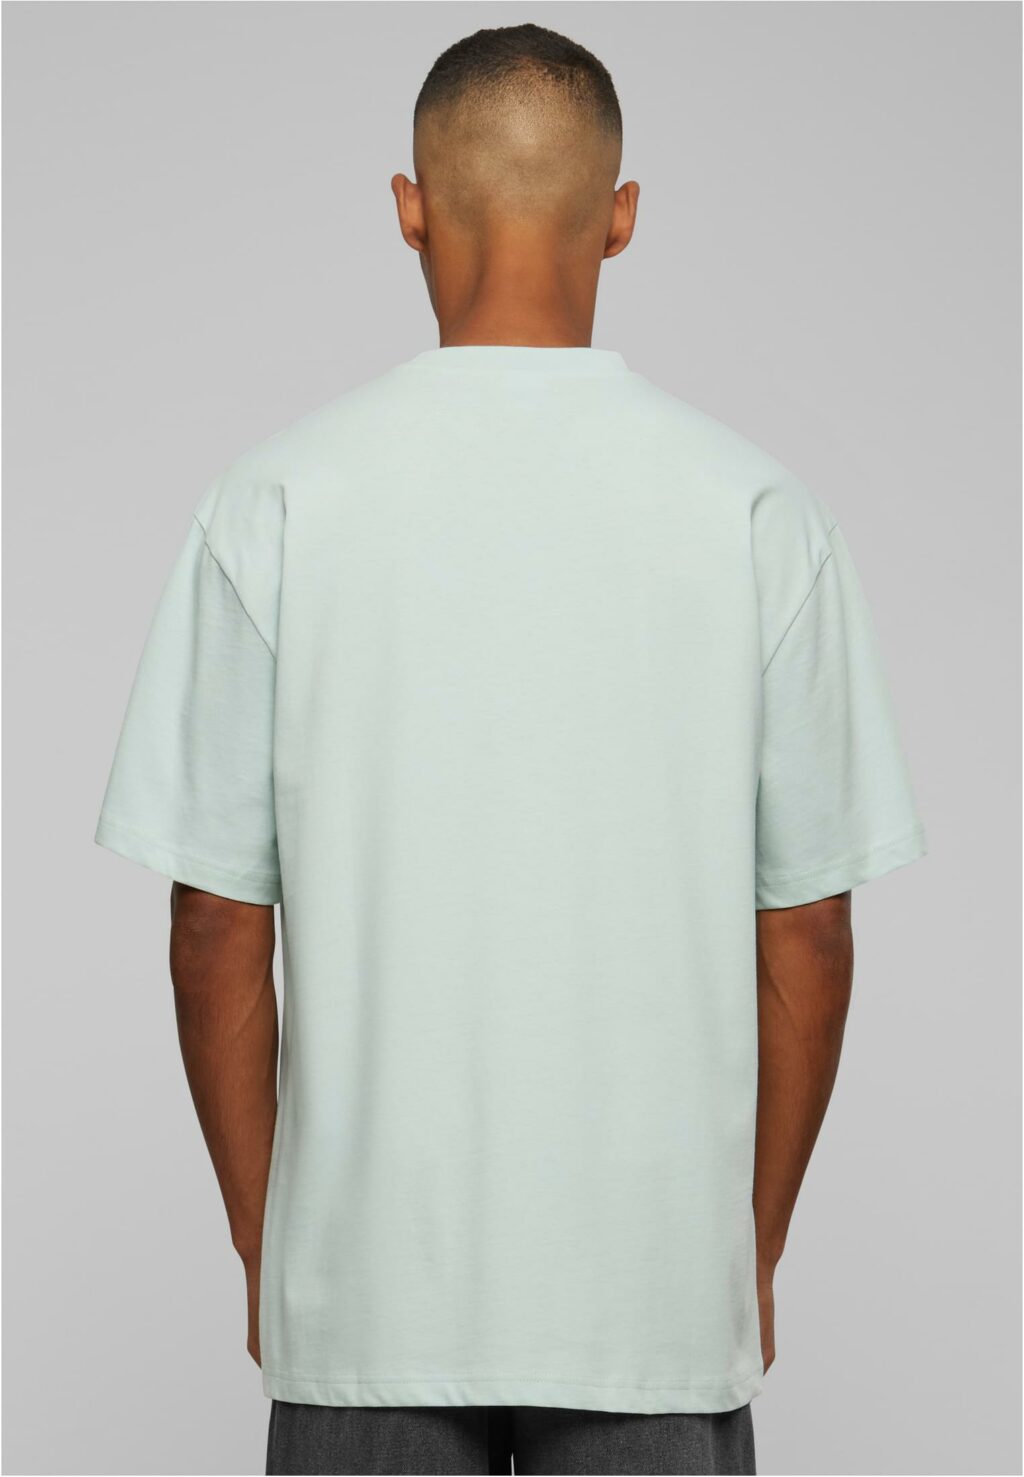 Urban Classics Tall Tee 2-Pack frostmint+white TB006A